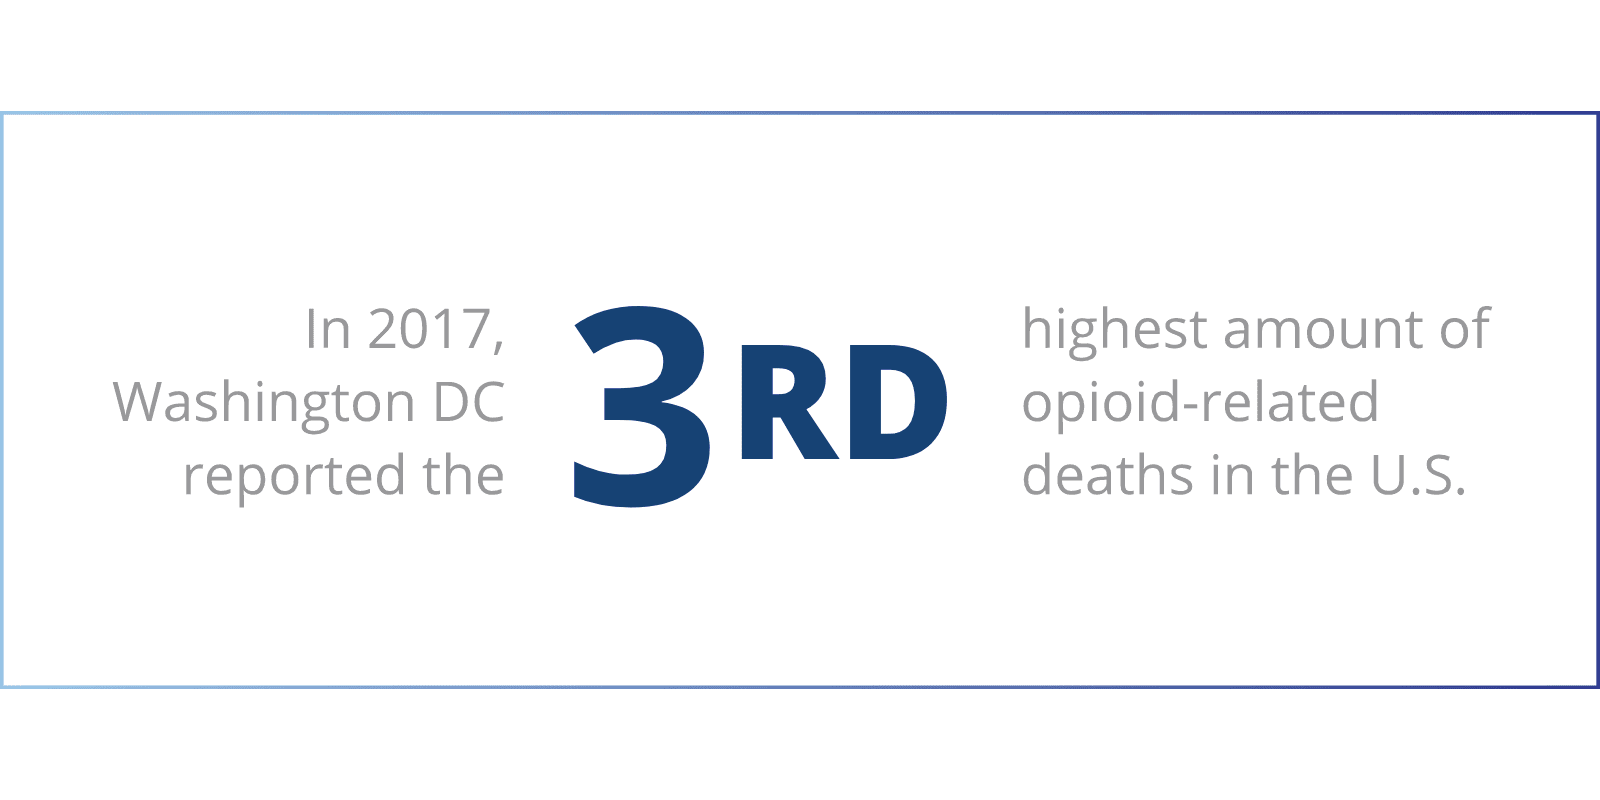 In 2017, Washington DC reported the 3rd highest amount of opioid-related deaths in the US